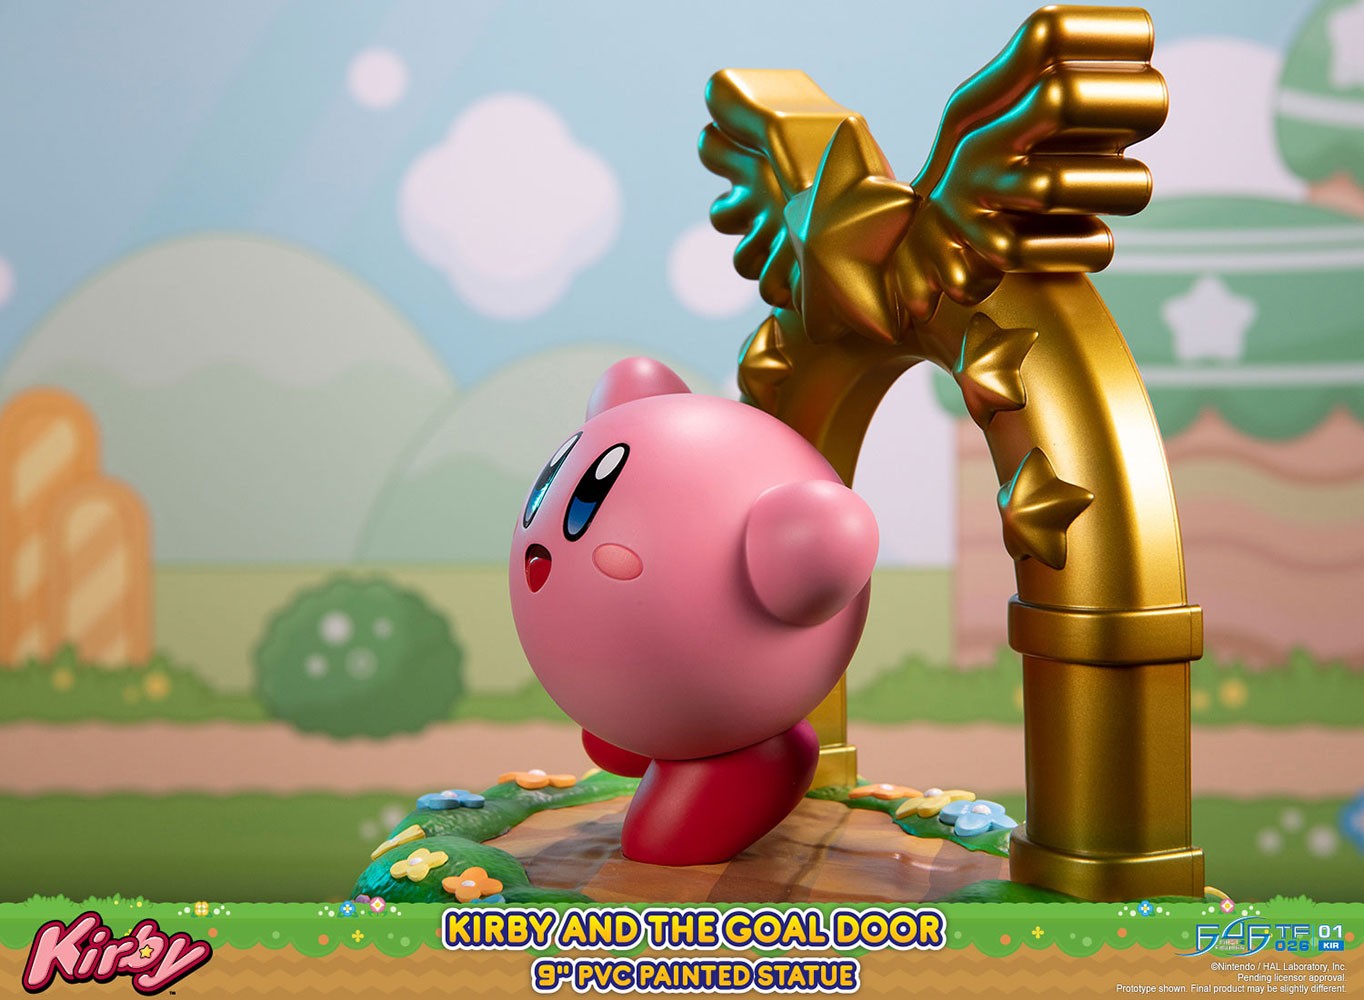 Kirby and the Goal Door PVC Statue | Sideshow Collectibles